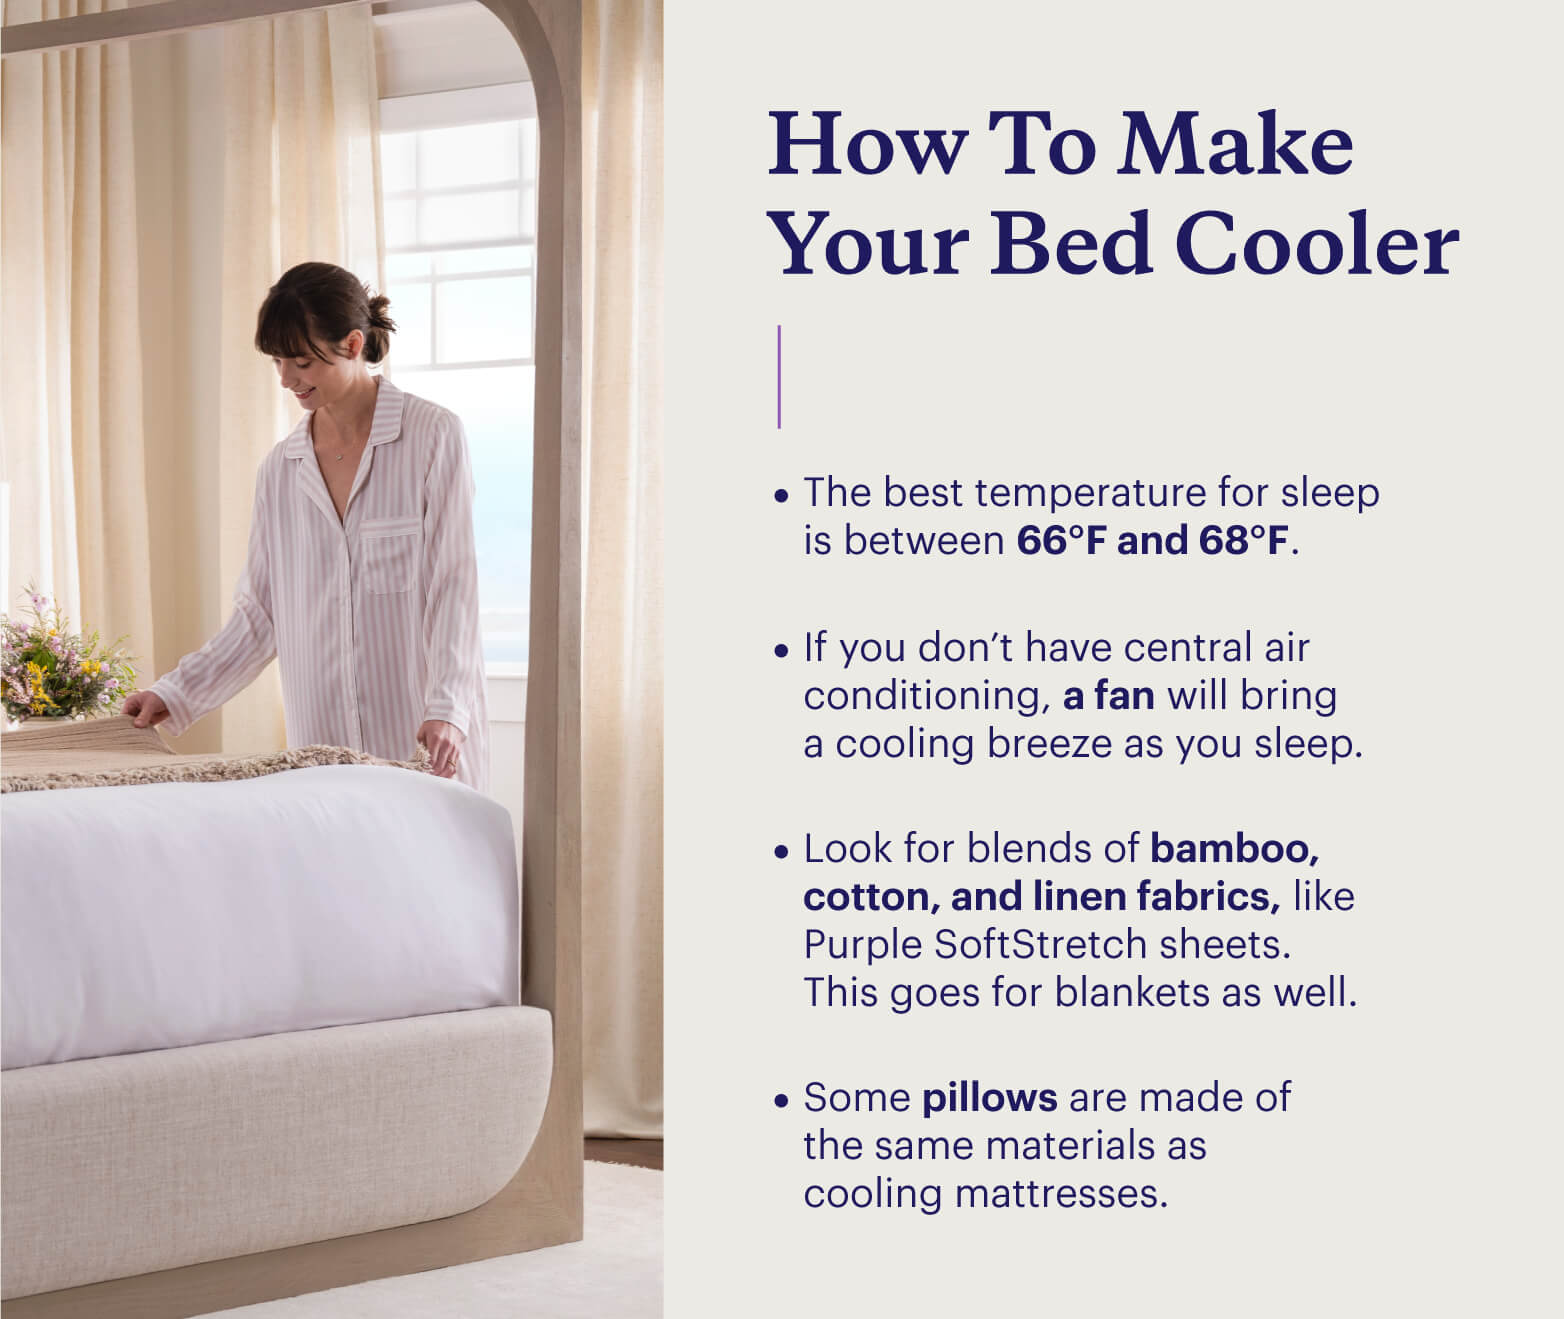 A graphic shows tips to make your bed cooler next to a woman putting a sheet over a Purple mattress.